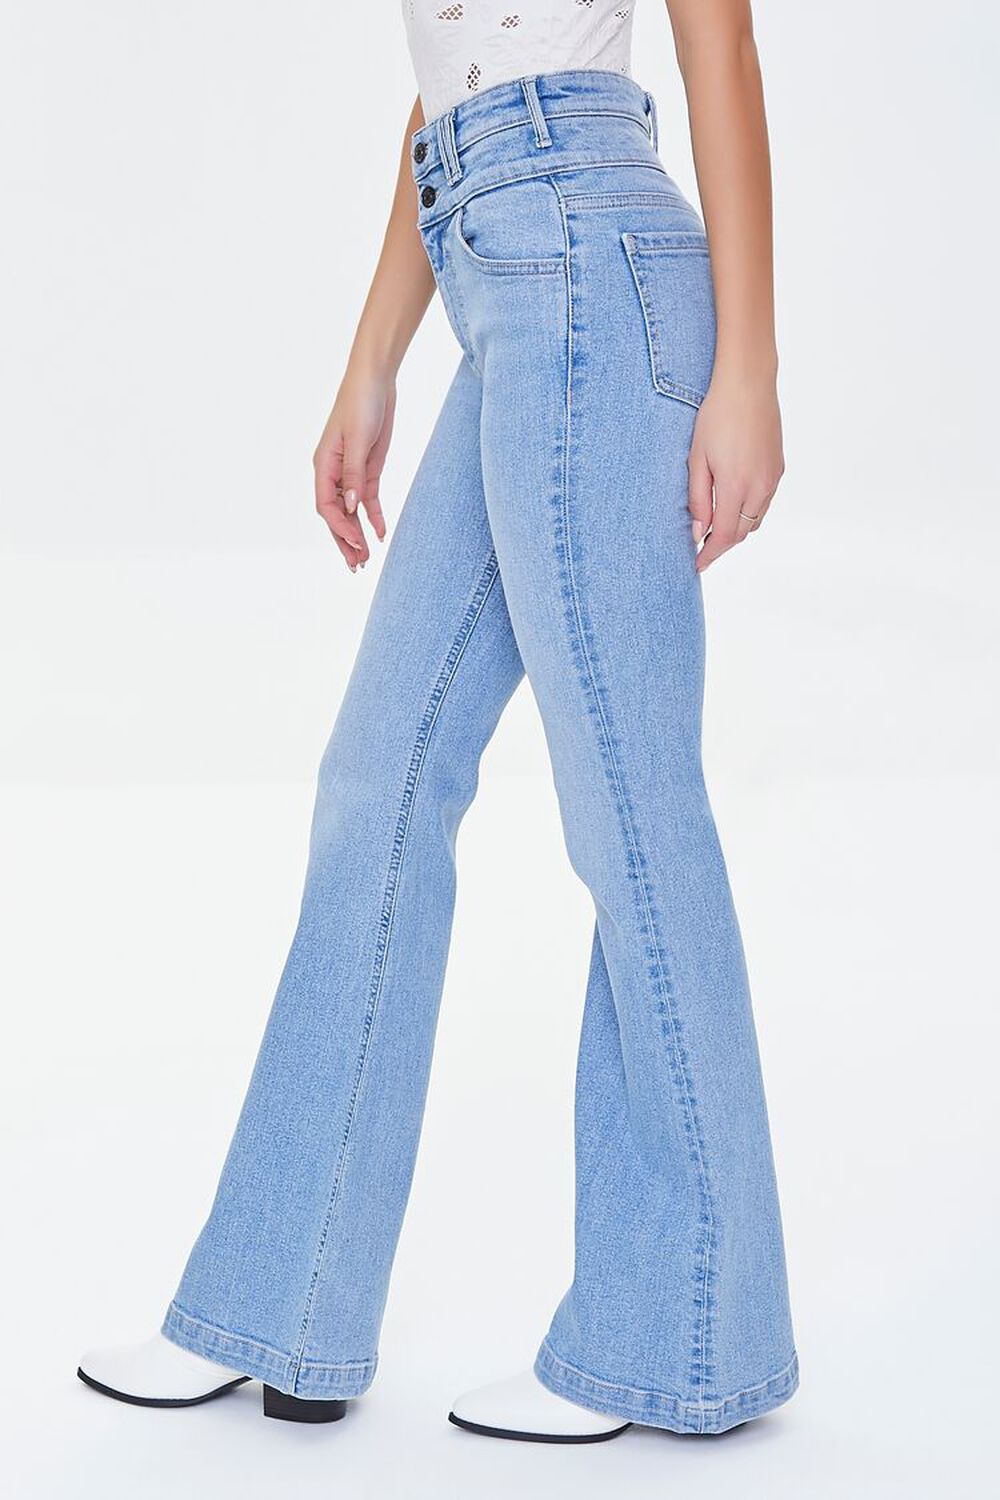 MEDIUM DENIM Recycled Cotton High-Rise Flare Jeans, image 3